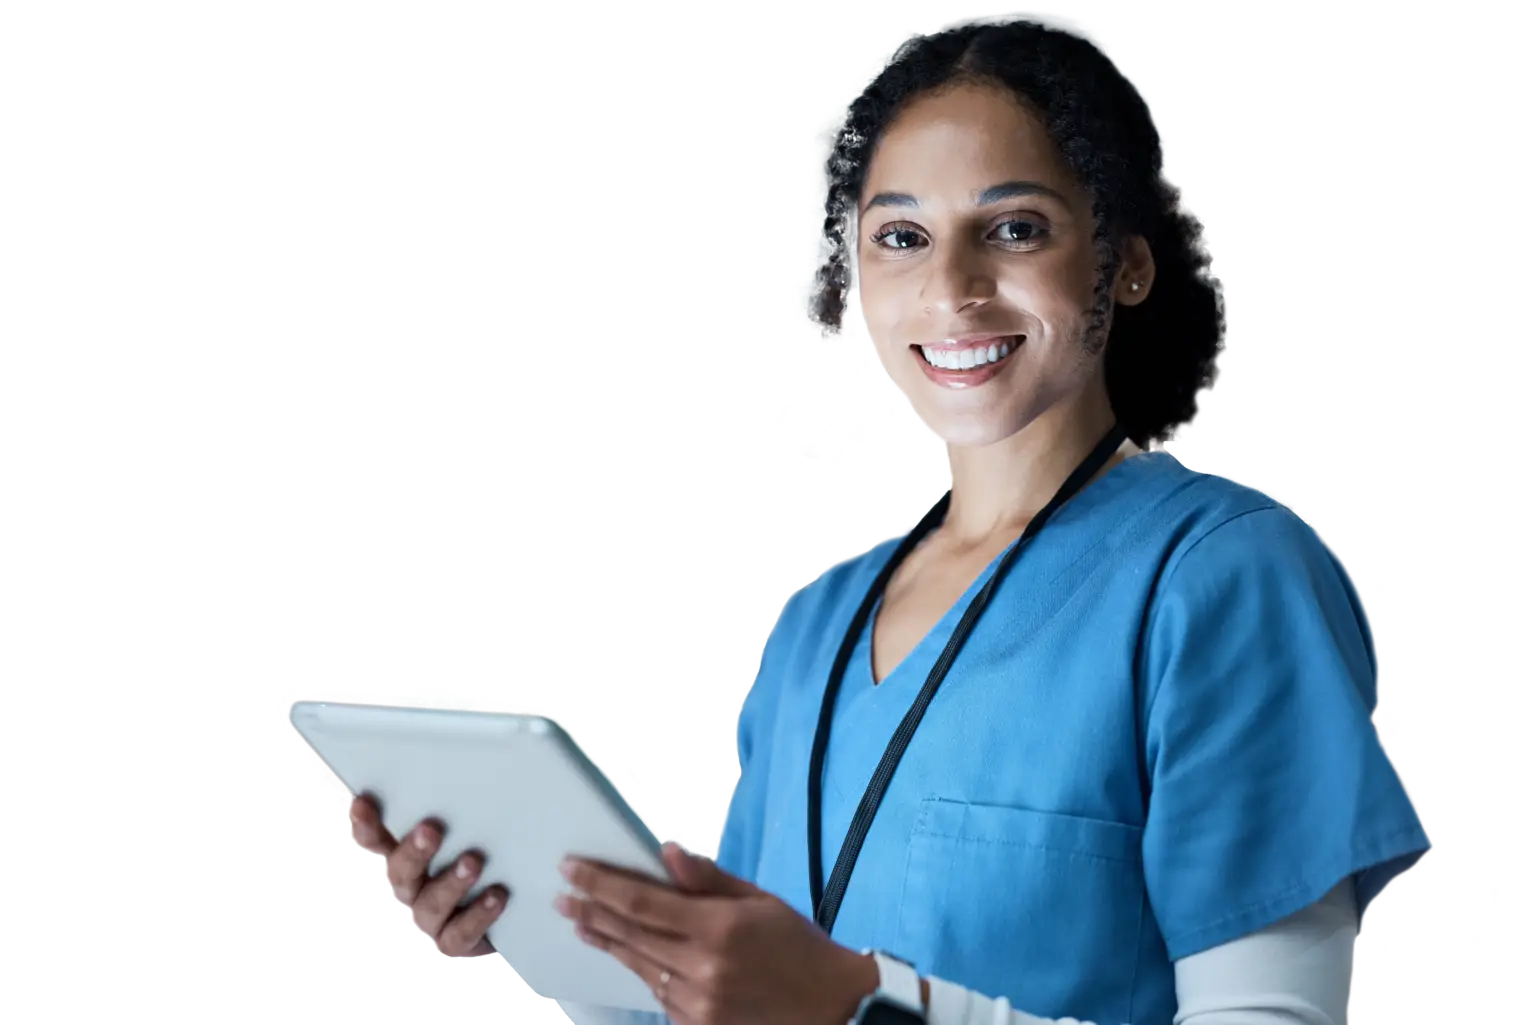 Portrait of a nurse holding a tablet and a Black woman in a hospital working on telehealth research or an online consultation, highlighting healthcare communication, integrated healthcare, patient management software, and care coordination platform.